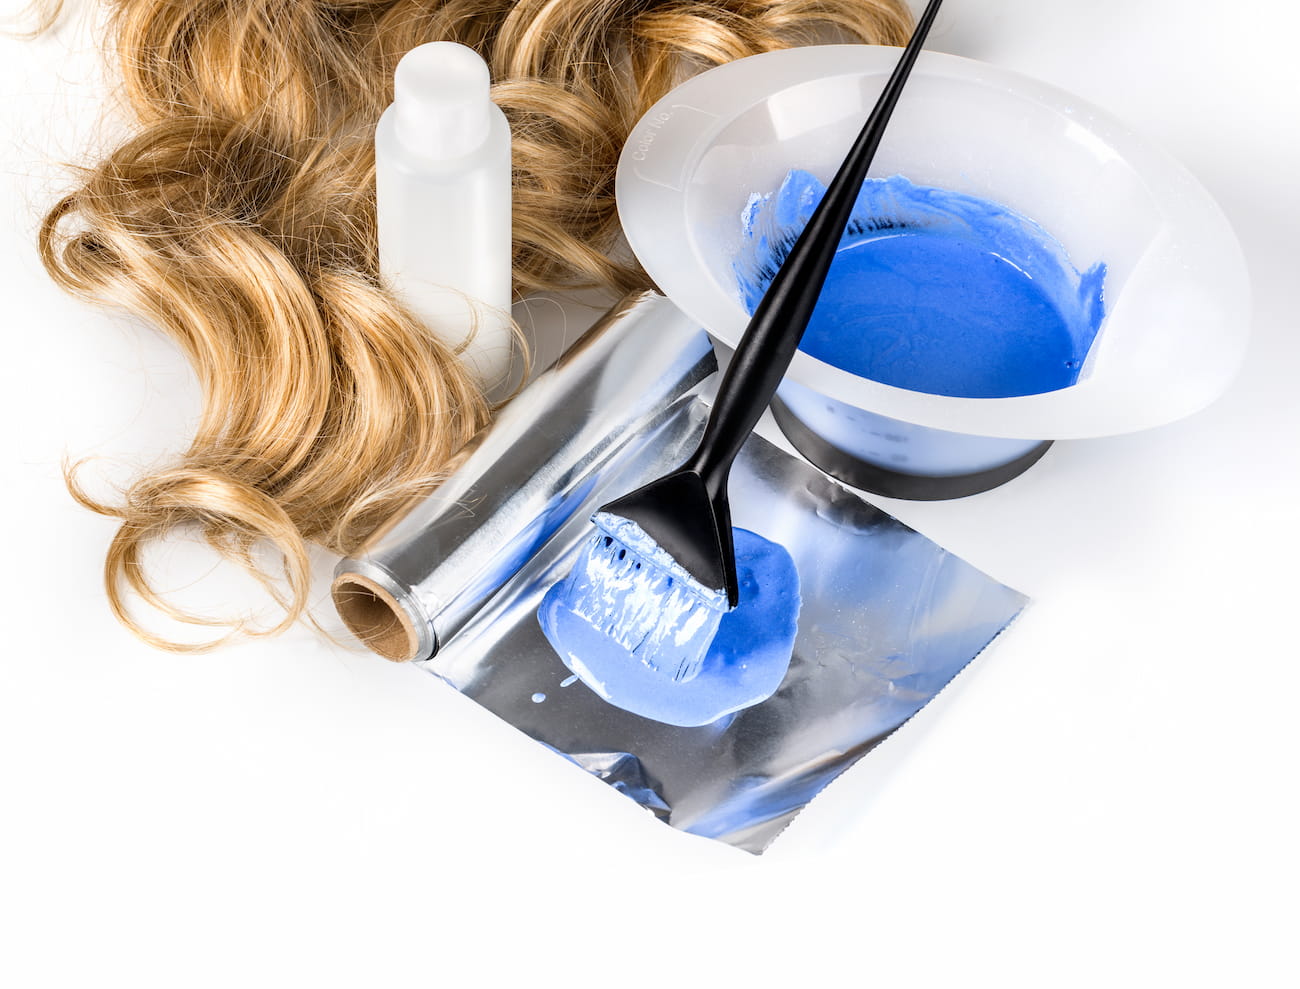 Principal image of dying your hair at home dos and donts